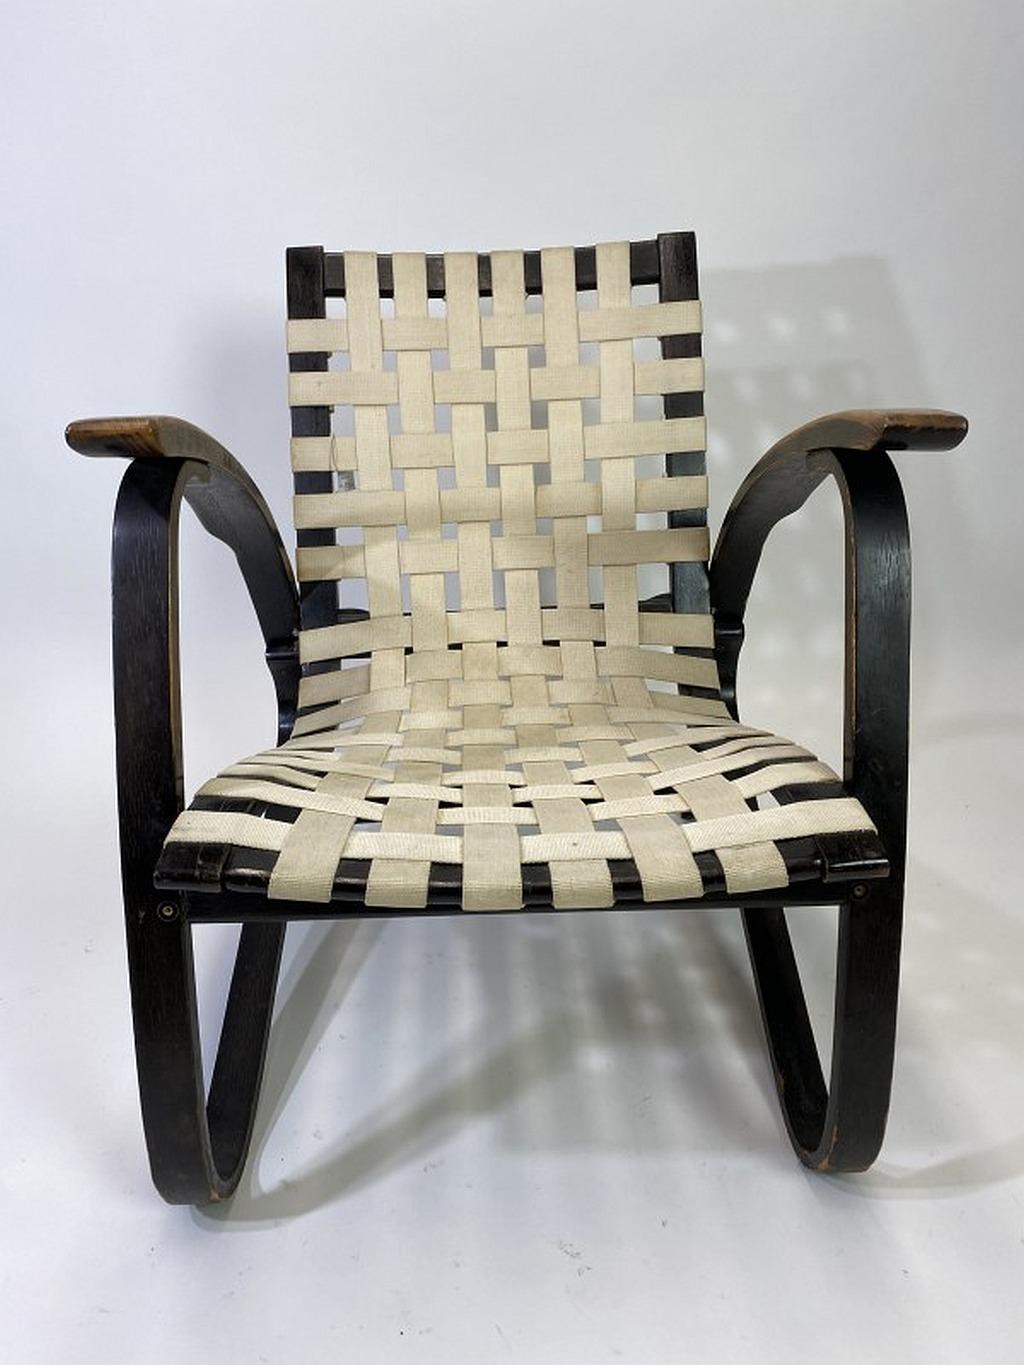 Black bentwood armchair, with white woven original strap seats, designed by Jan Vanek in the 1930s. The armchairs were produced by UP Zavody Brno.